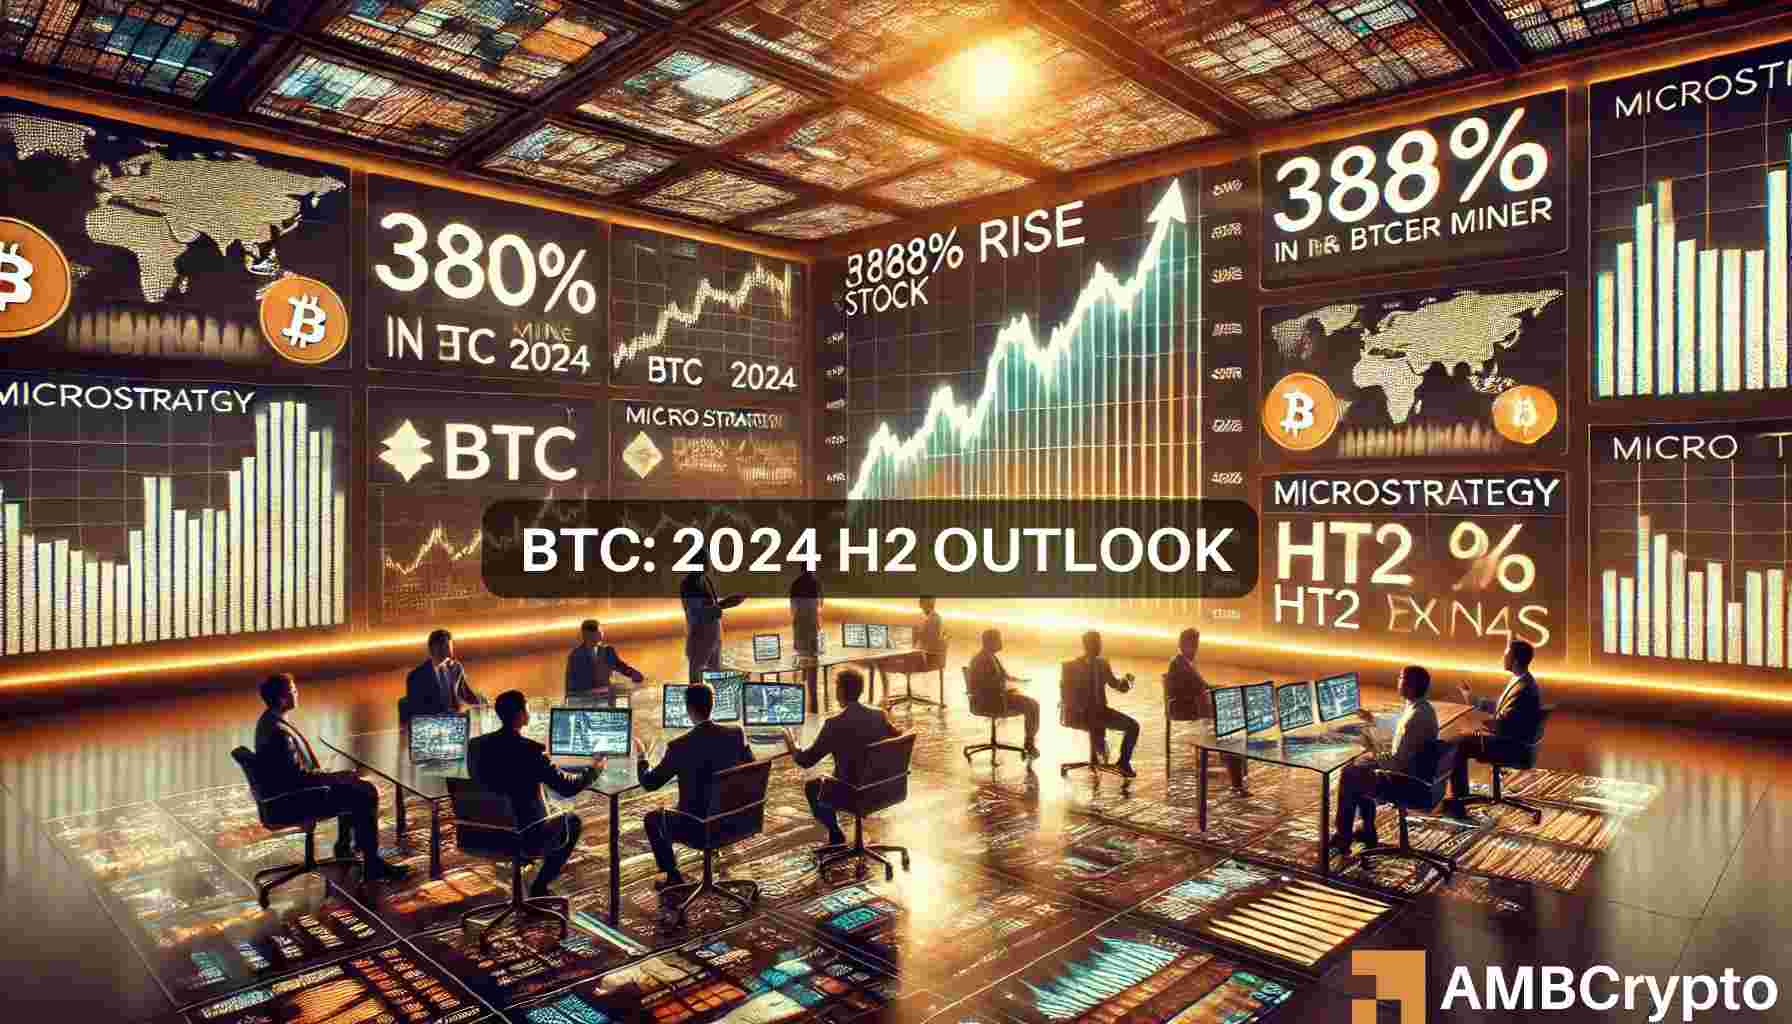 How Bitcoin holdings drove MicroStrategy’s 380% stock surge